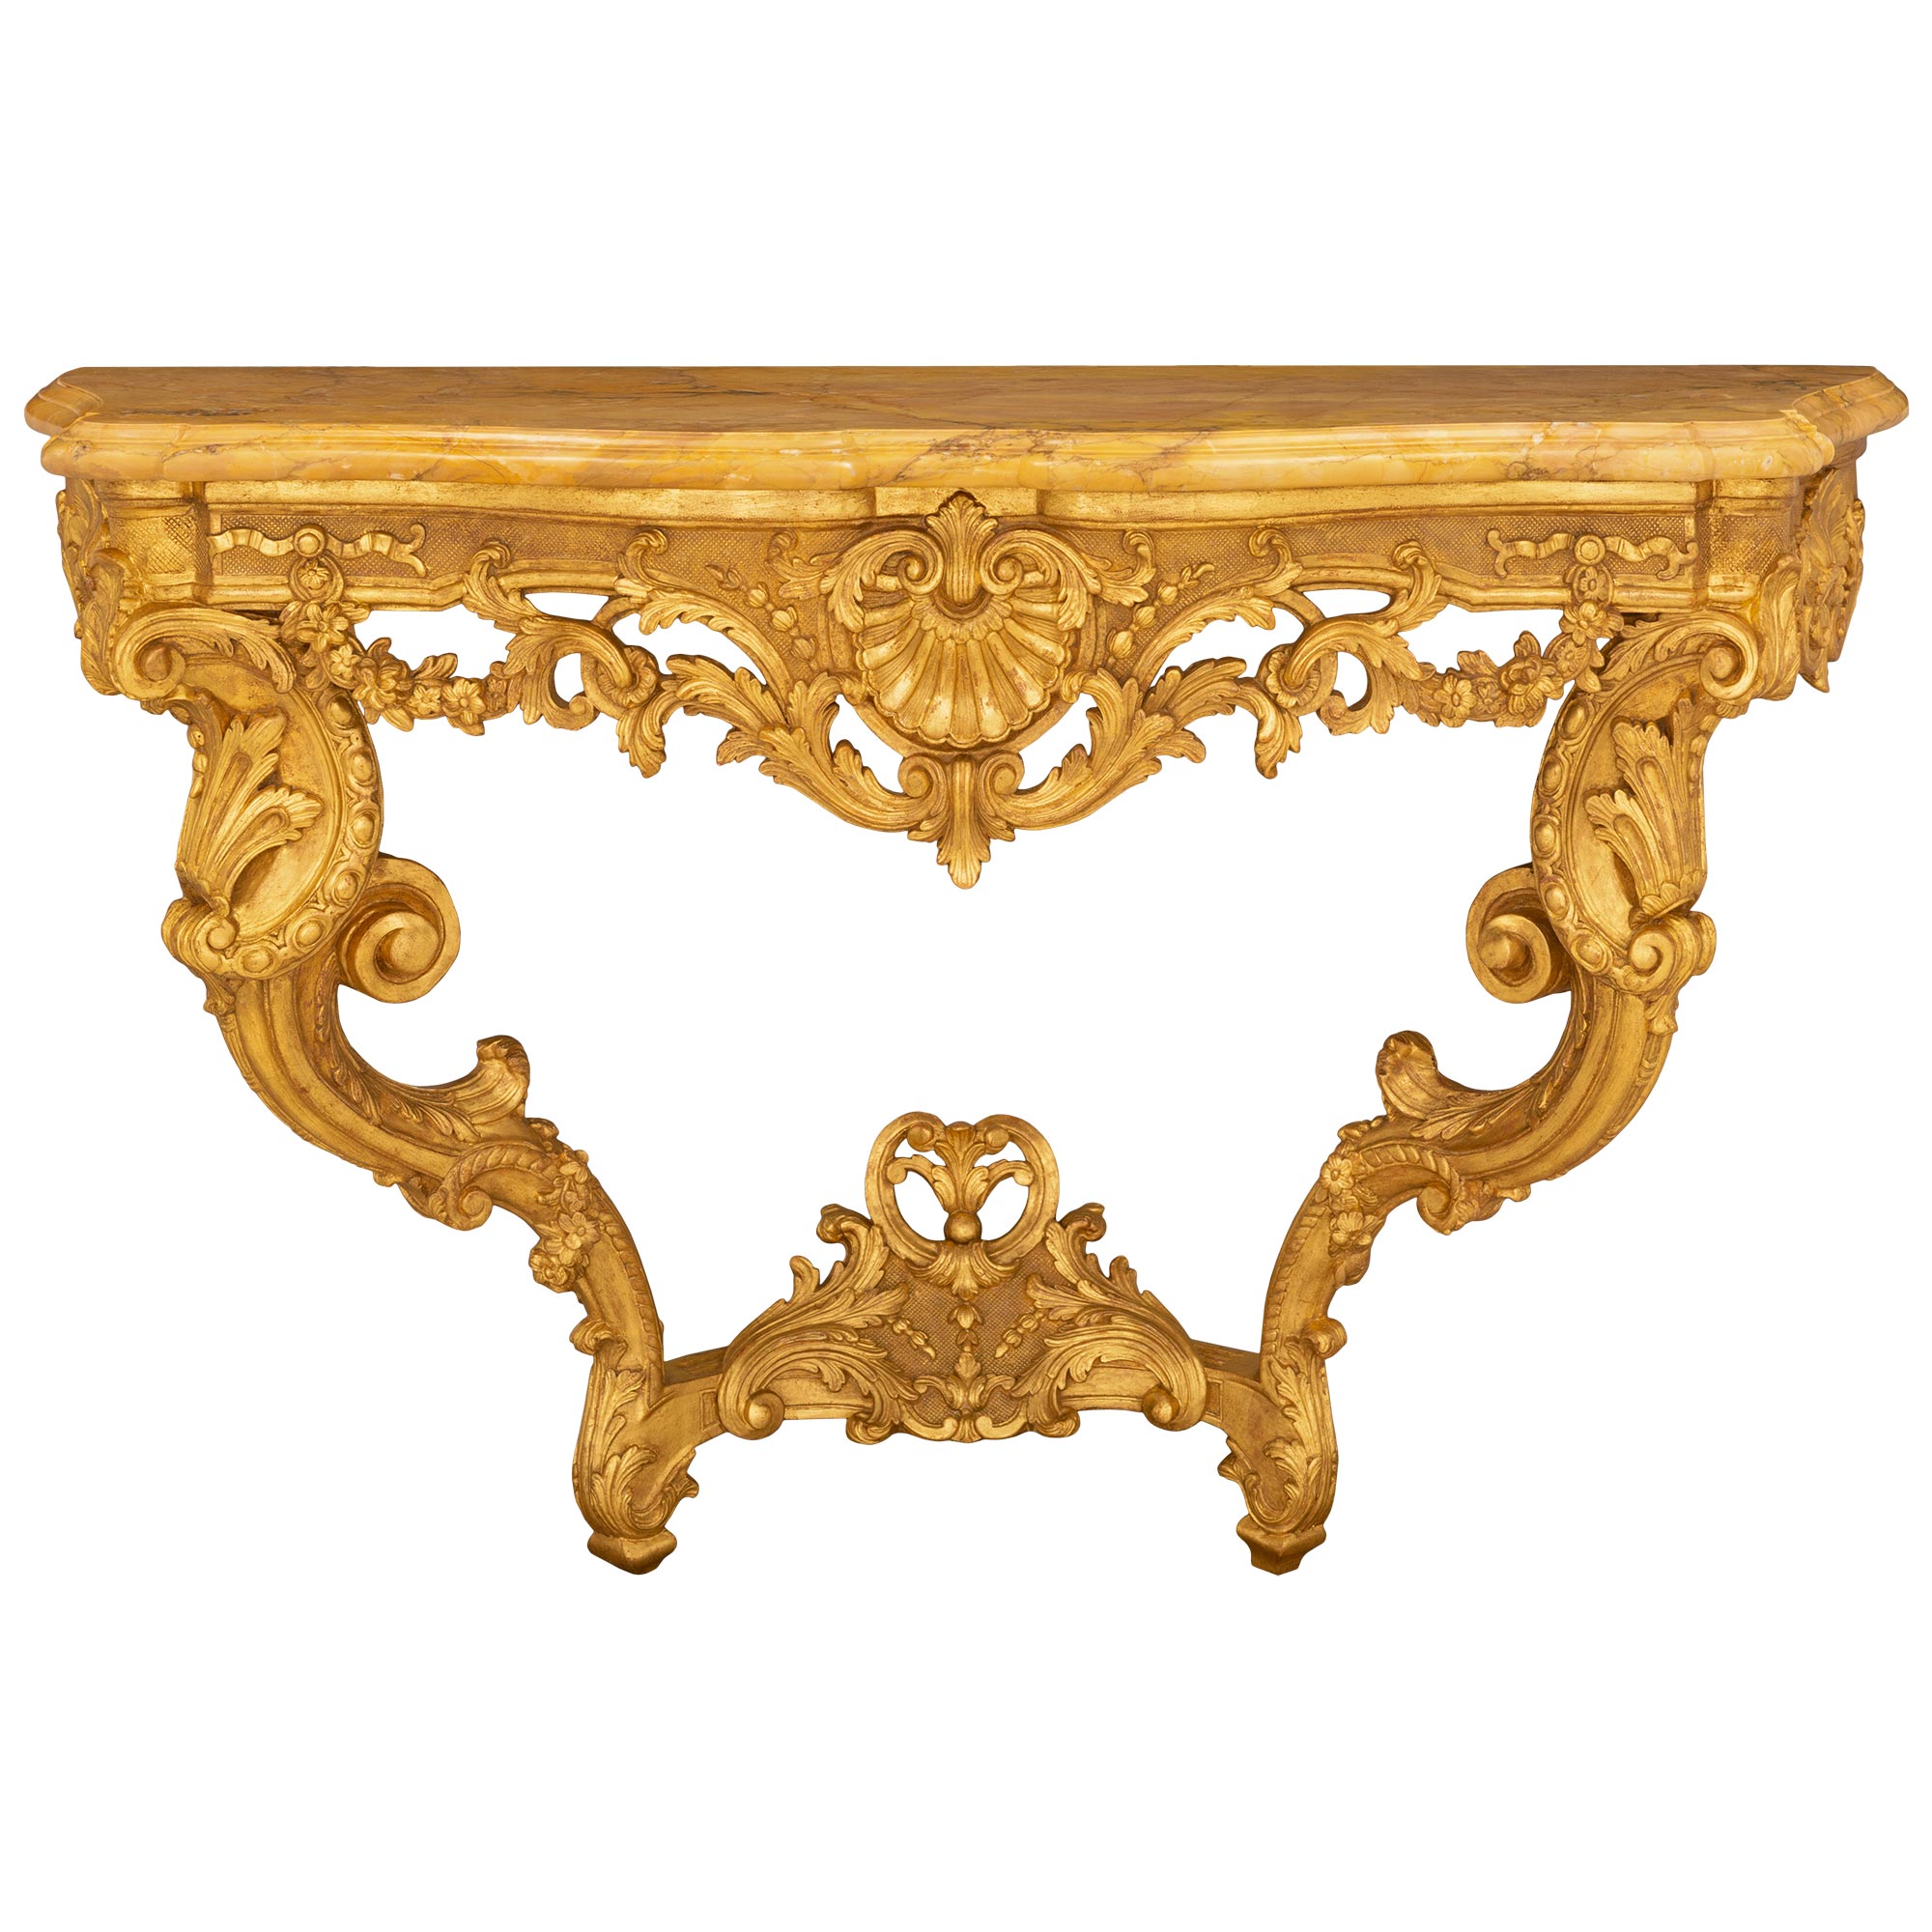 French 18th Century Régence Period Giltwood and Sienna Marble Console Circa 1720 For Sale